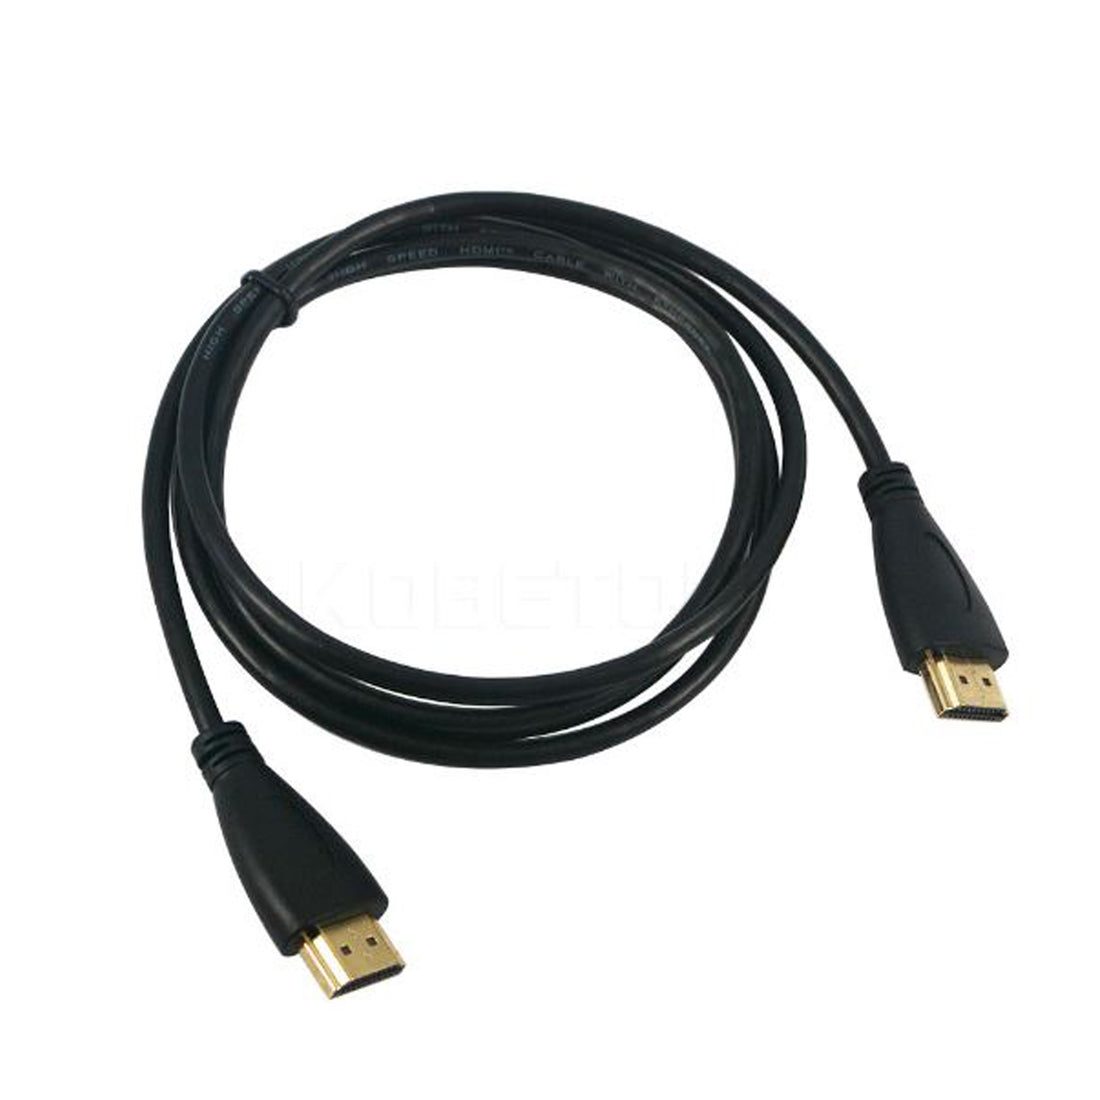 HDMI Cable - 5, 10 or 16 feet